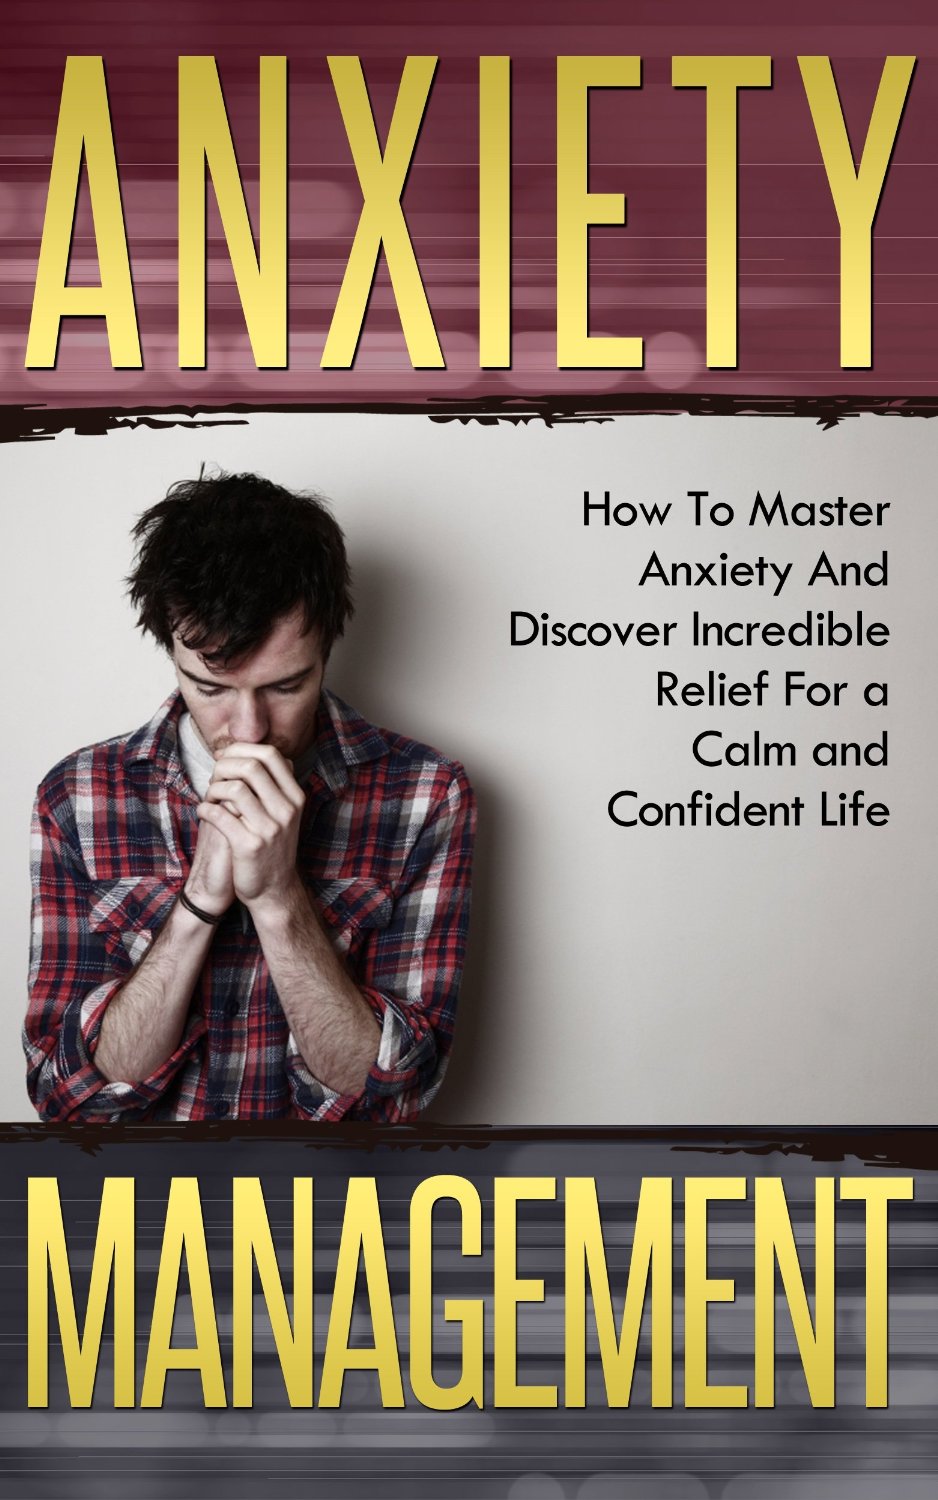 Anxiety Management: How To Master Anxiety And Discover Incredible Relief For a Calm and Confident Life by James Browning